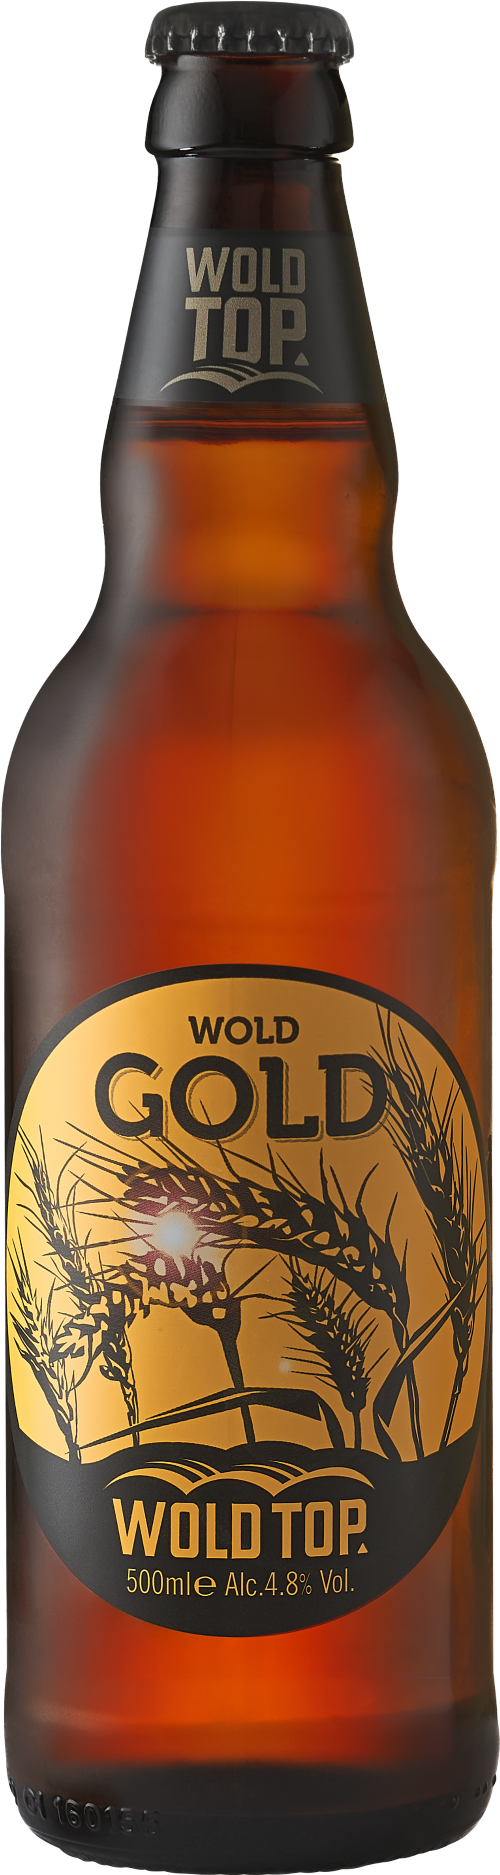 WOLD TOP Wold Gold Blonde Beer 4.8% ABV 500ml